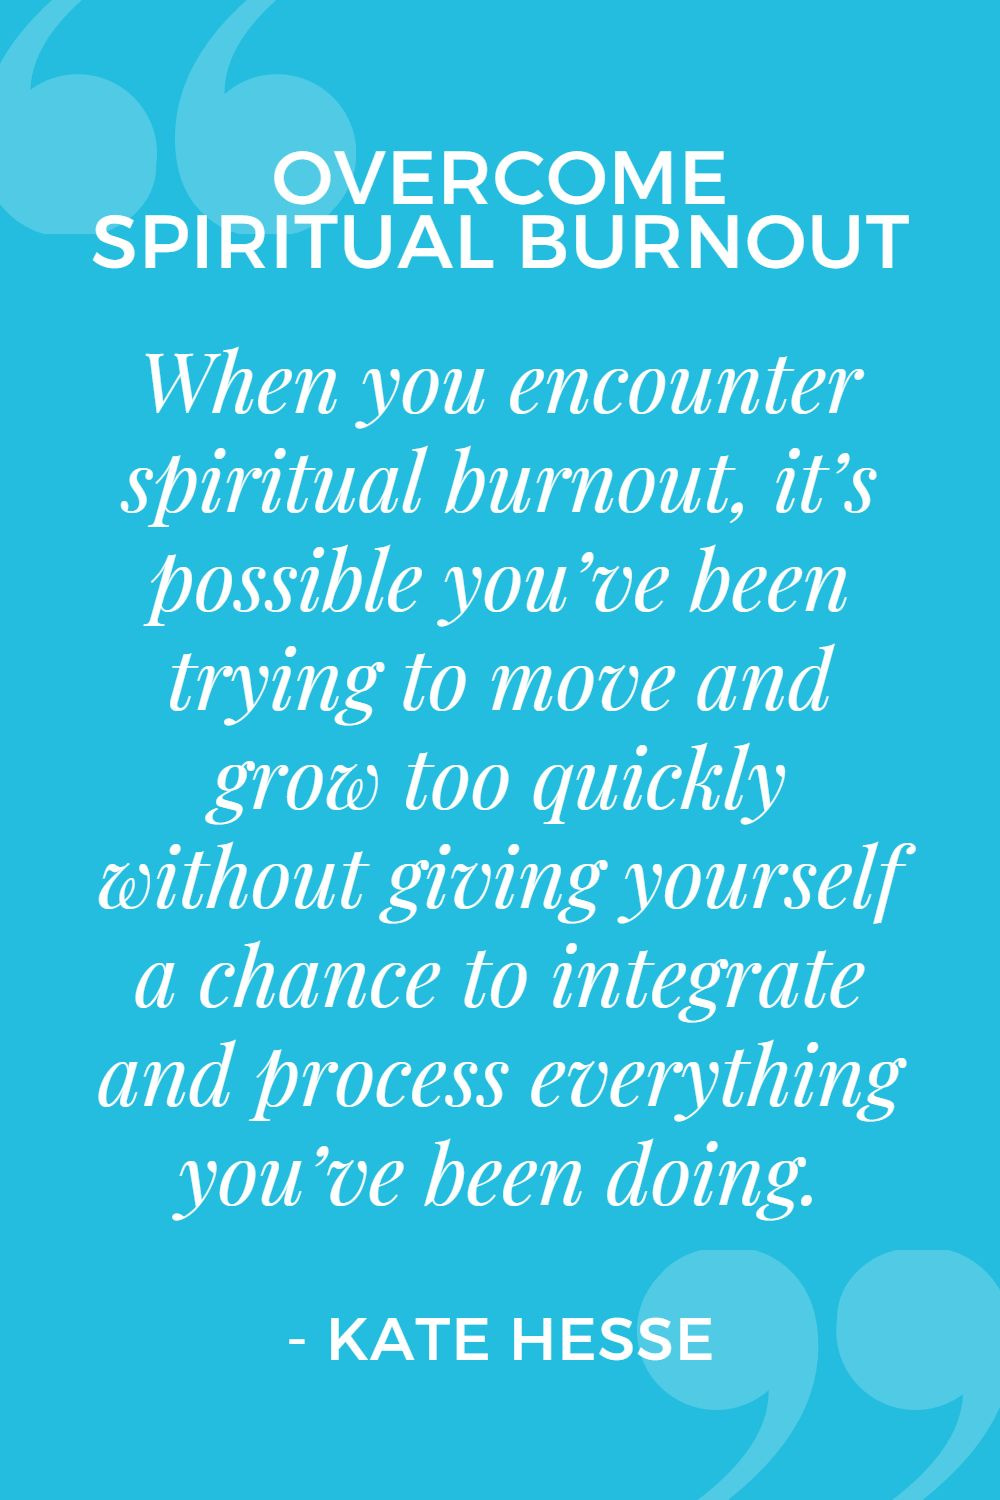 When you encounter spiritual burnout, it's possible you've been trying to move and grow too quickly without giving yourself a chance to integrate and process everything you've been doing.